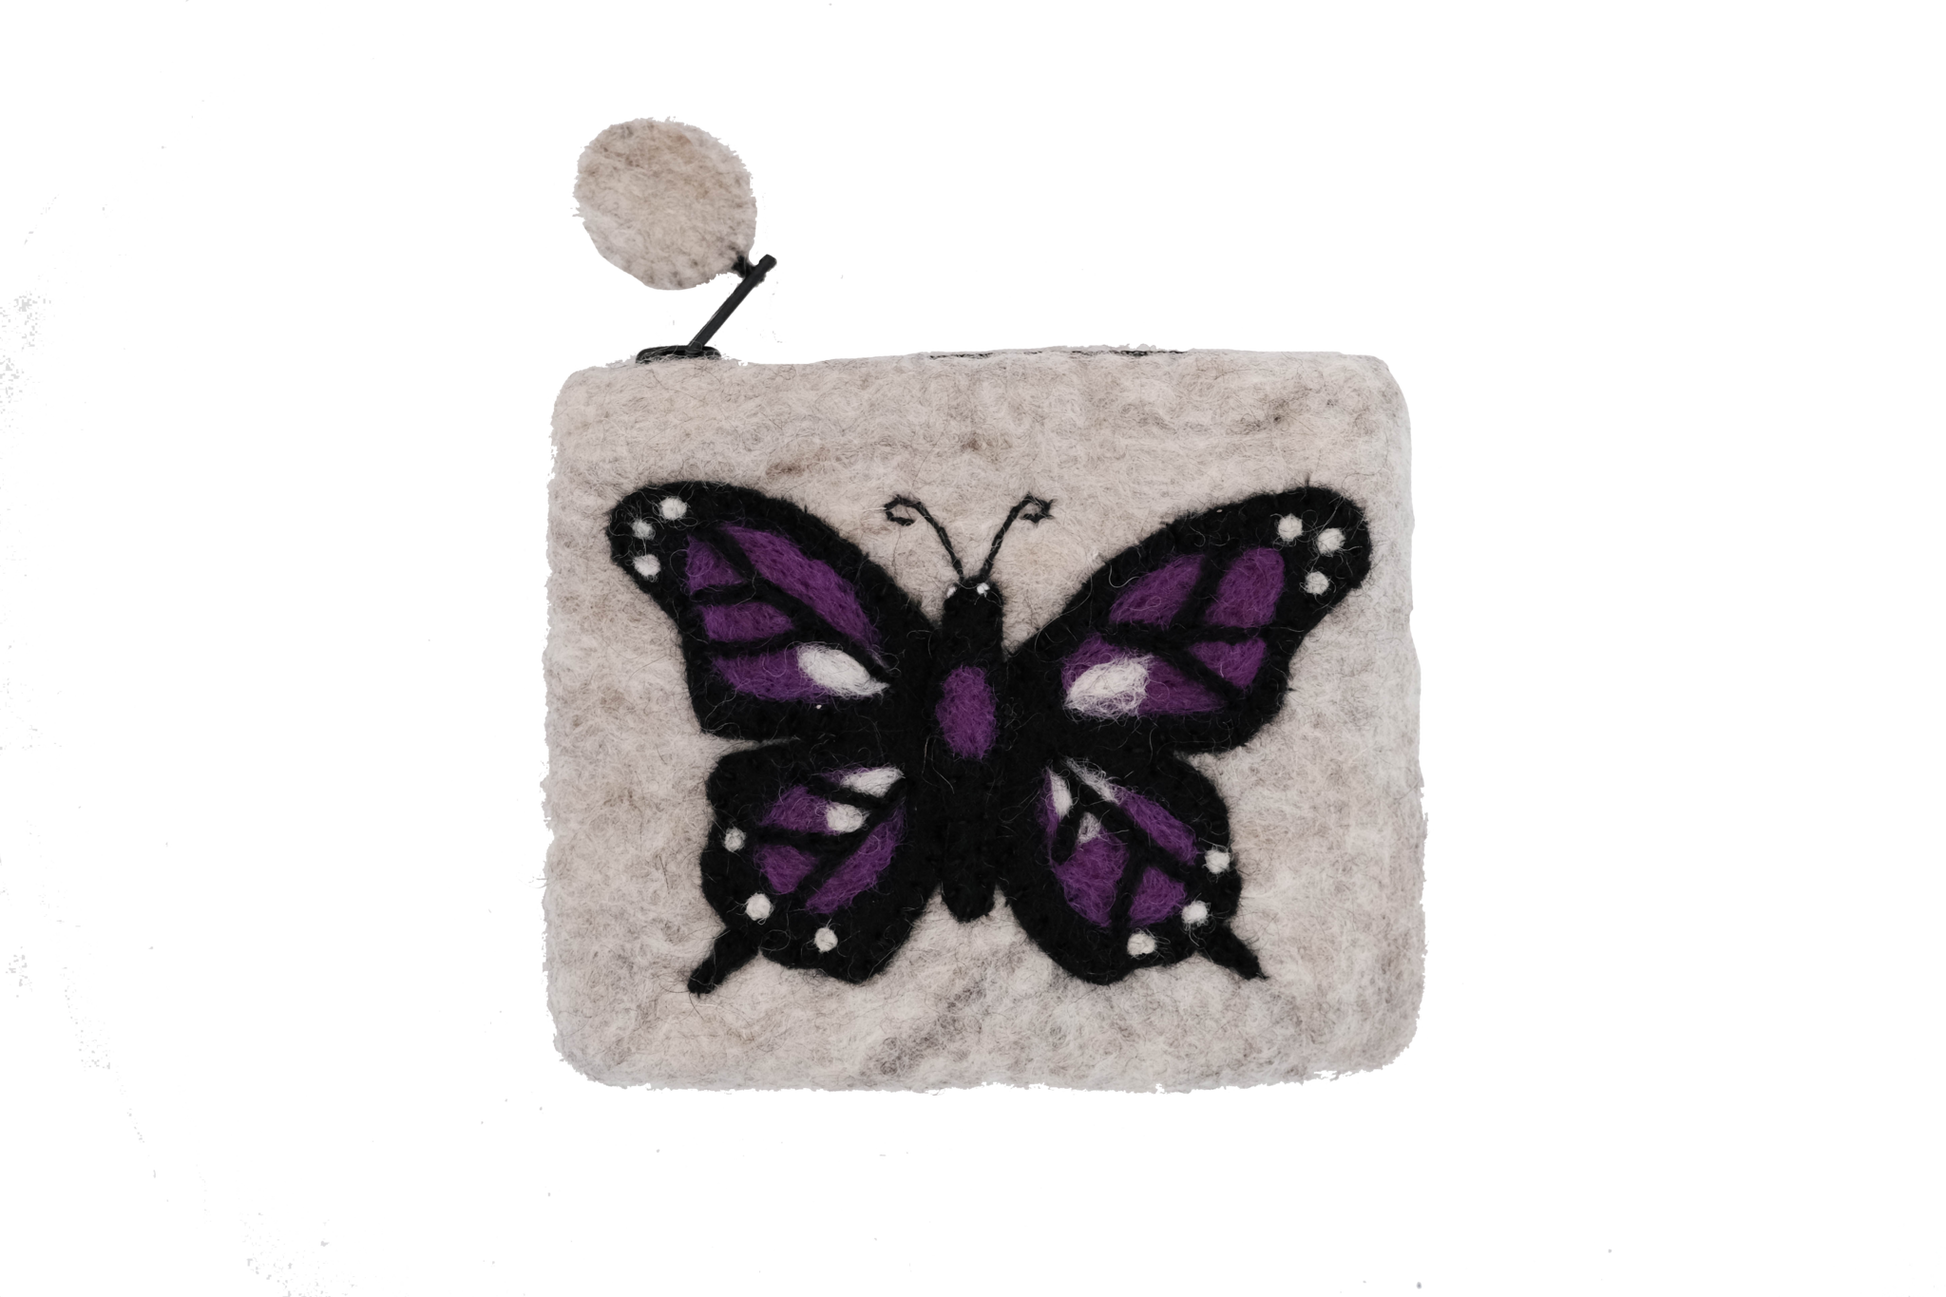 This Global Groove Life, handmade, ethical, fair trade, eco-friendly, sustainable, grey felt zipper coin pouch was created by artisans in Kathmandu Nepal and is adorned with a beautiful purple butterfly motif.